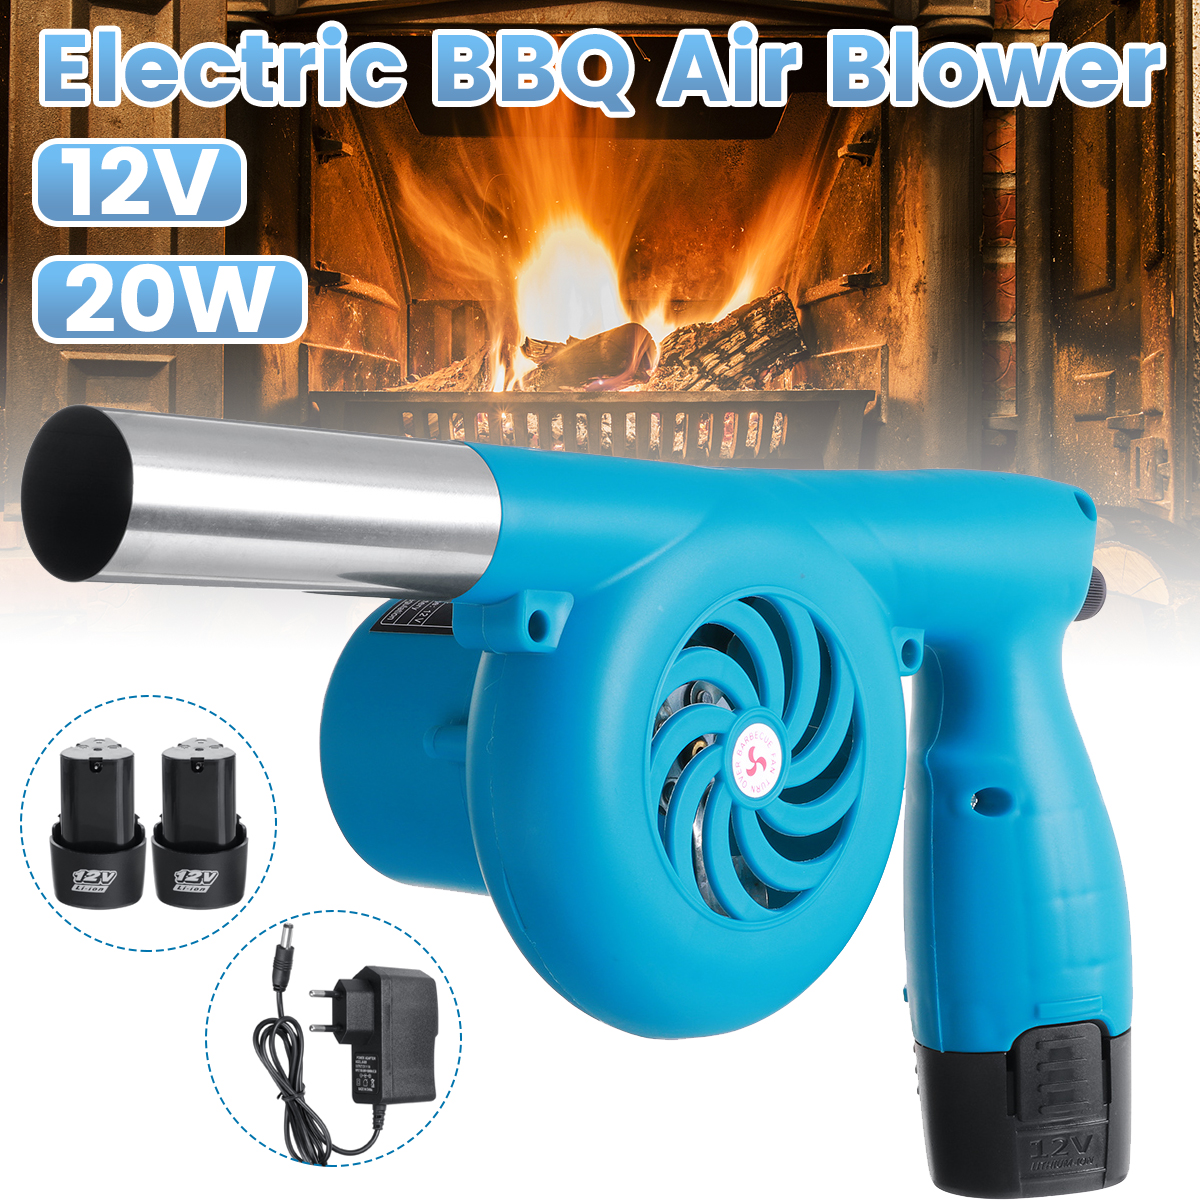 12V-Outdoor-Cooking-Electric-BBQ-Fan-Air-Blower-Rechargeable-BBQ-Grill-Fan-Guns-Portable-Fire-Campin-1861810-2